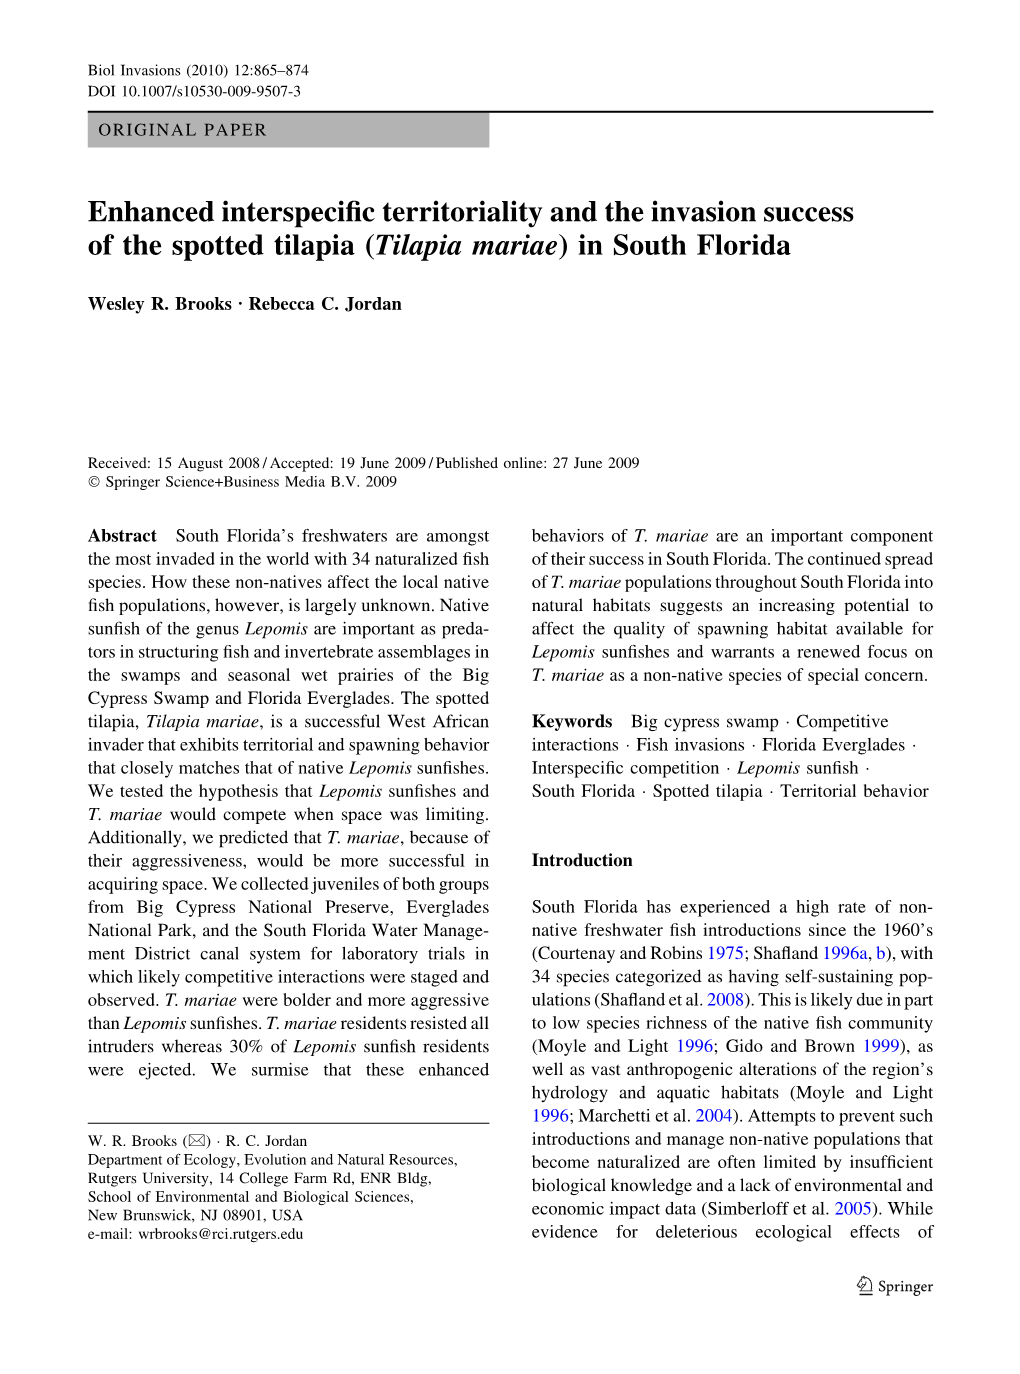 Enhanced Interspecific Territoriality and the Invasion Success of The